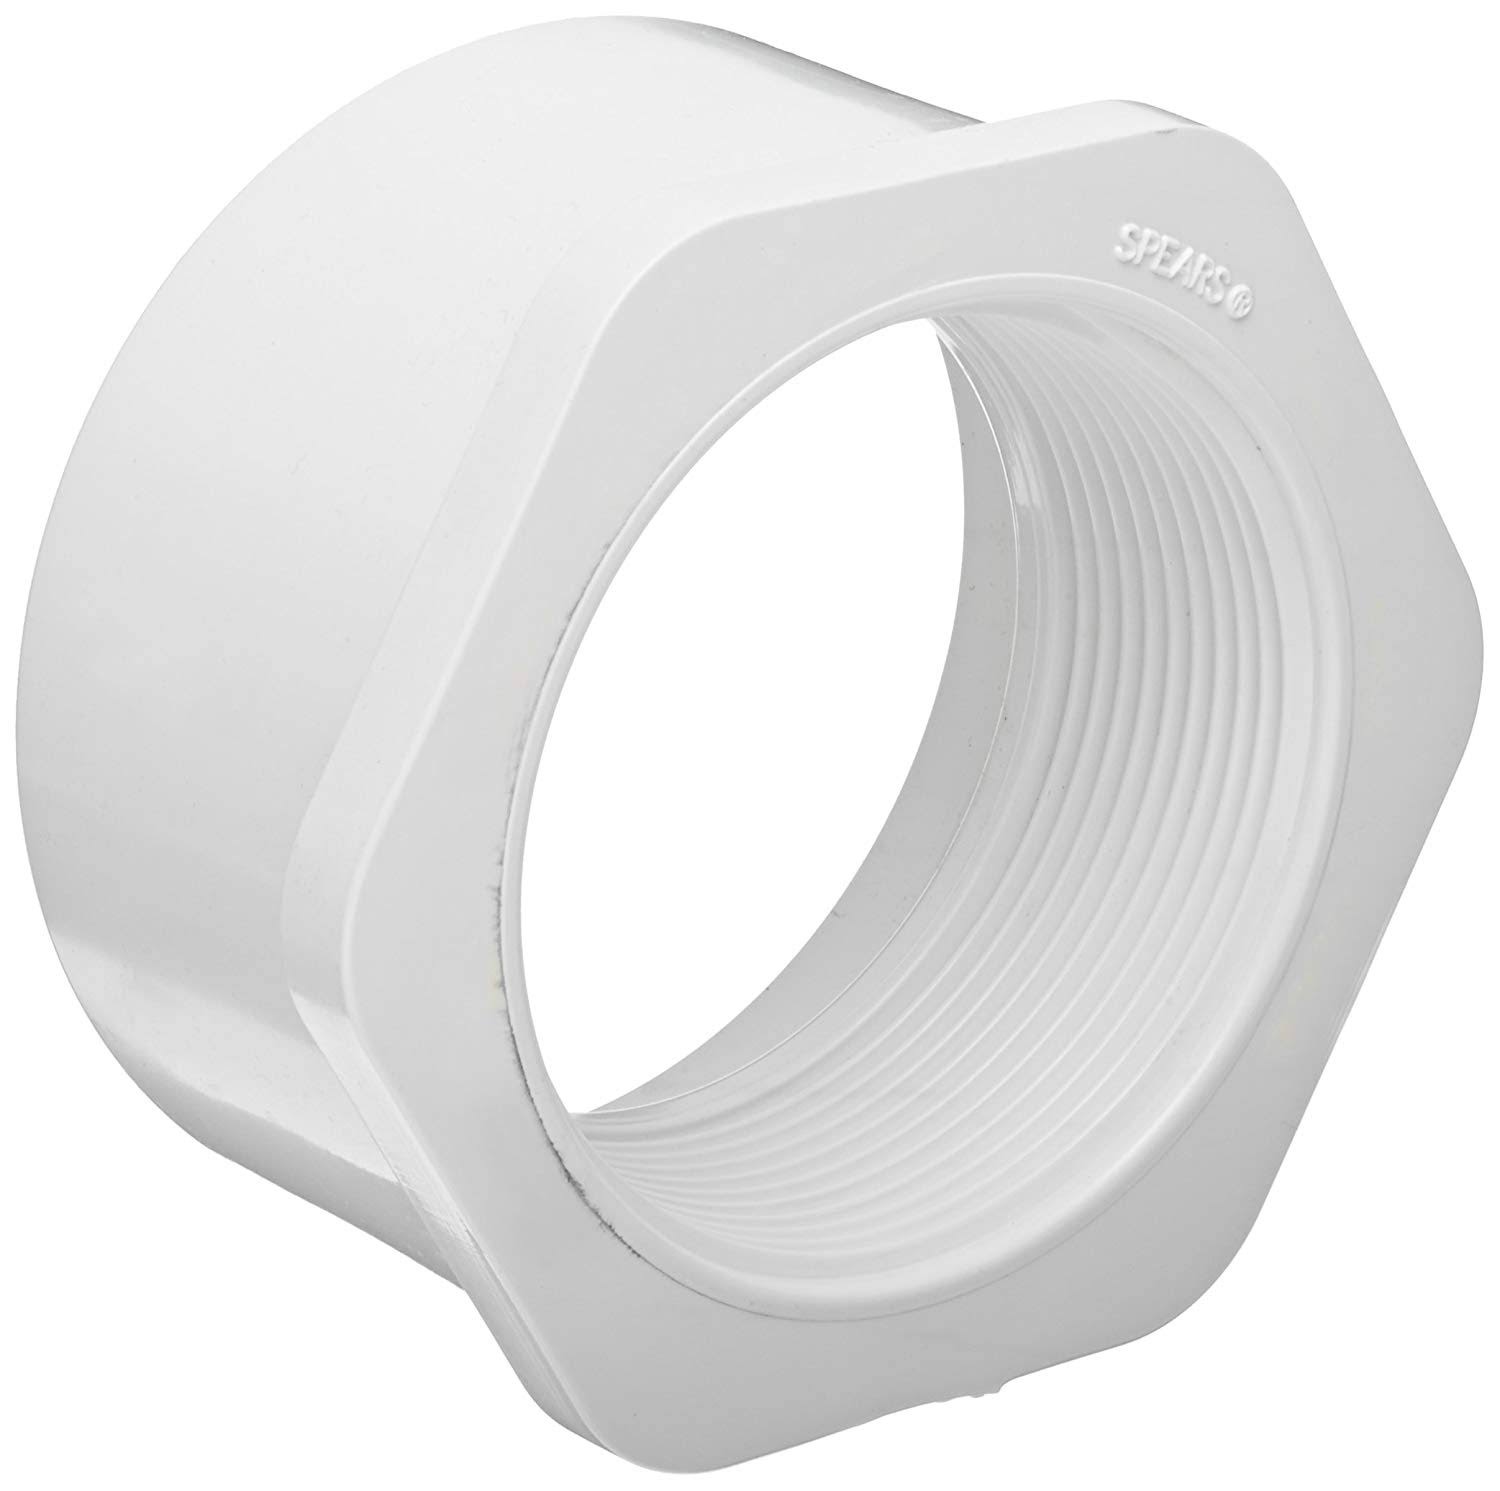 Spears Bushing PVC Pipe Fitting - White, Schedule 40, 3" x 2"